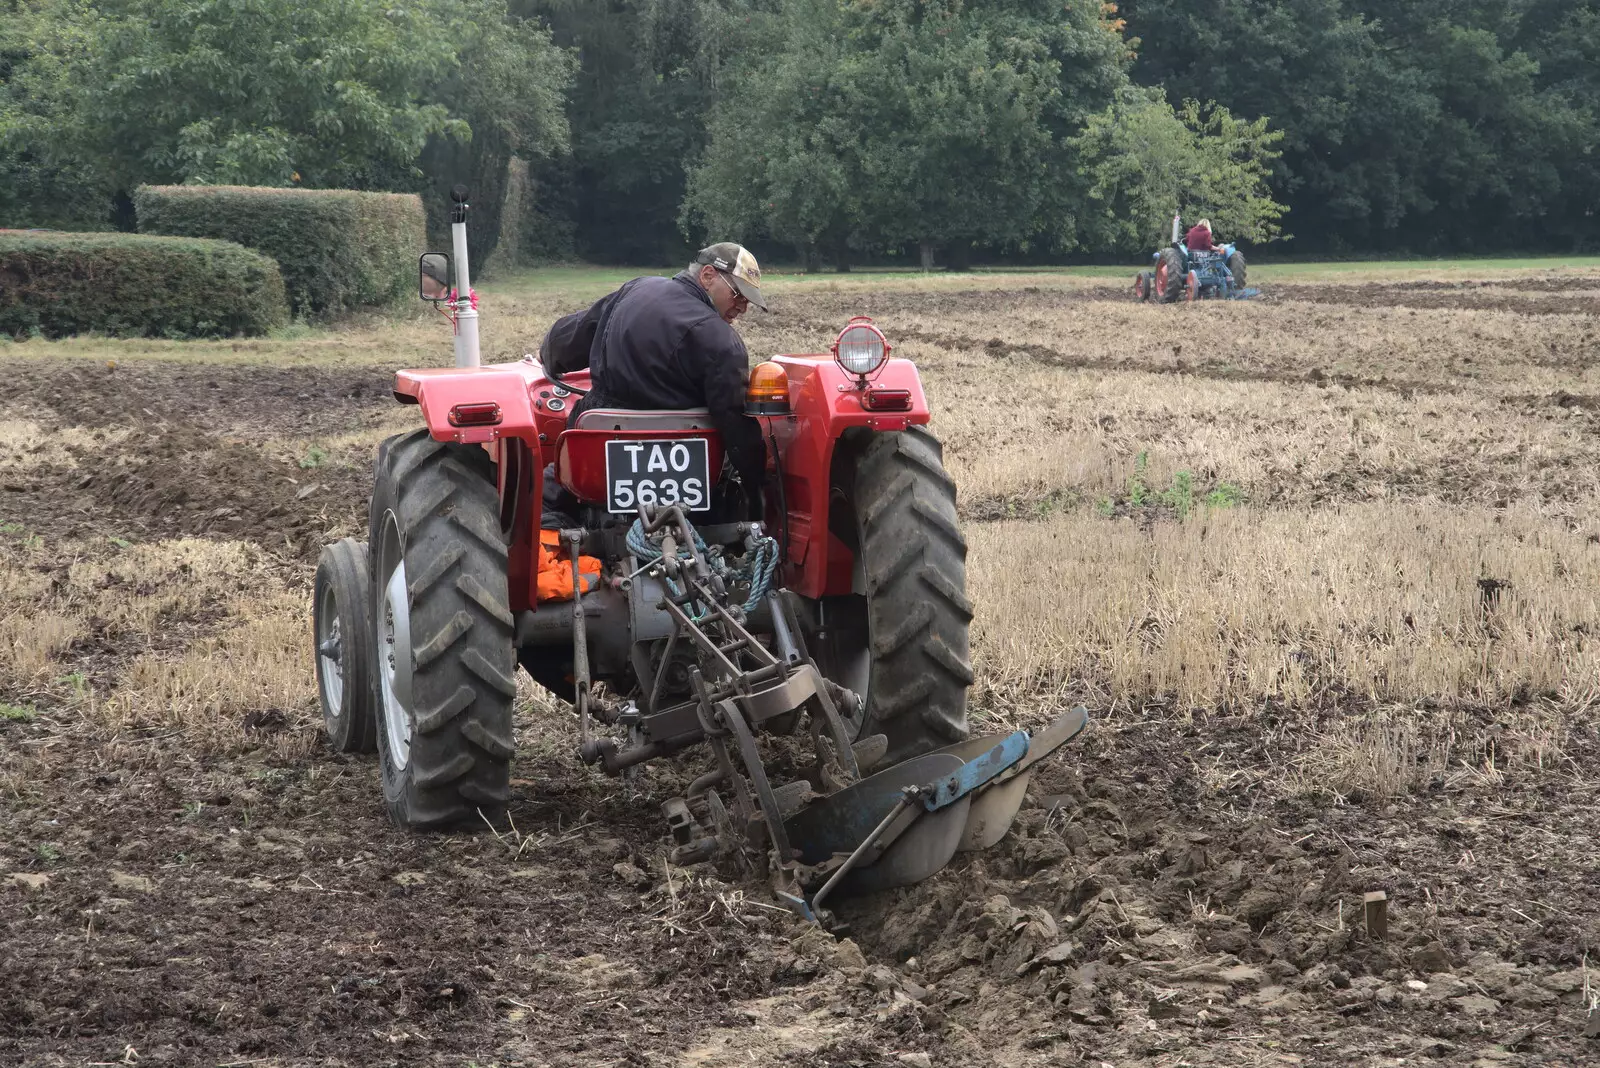 Another tractors gets its plough on, from Vintage Tractor Ploughing, Thrandeston, Suffolk - 26th September 2021